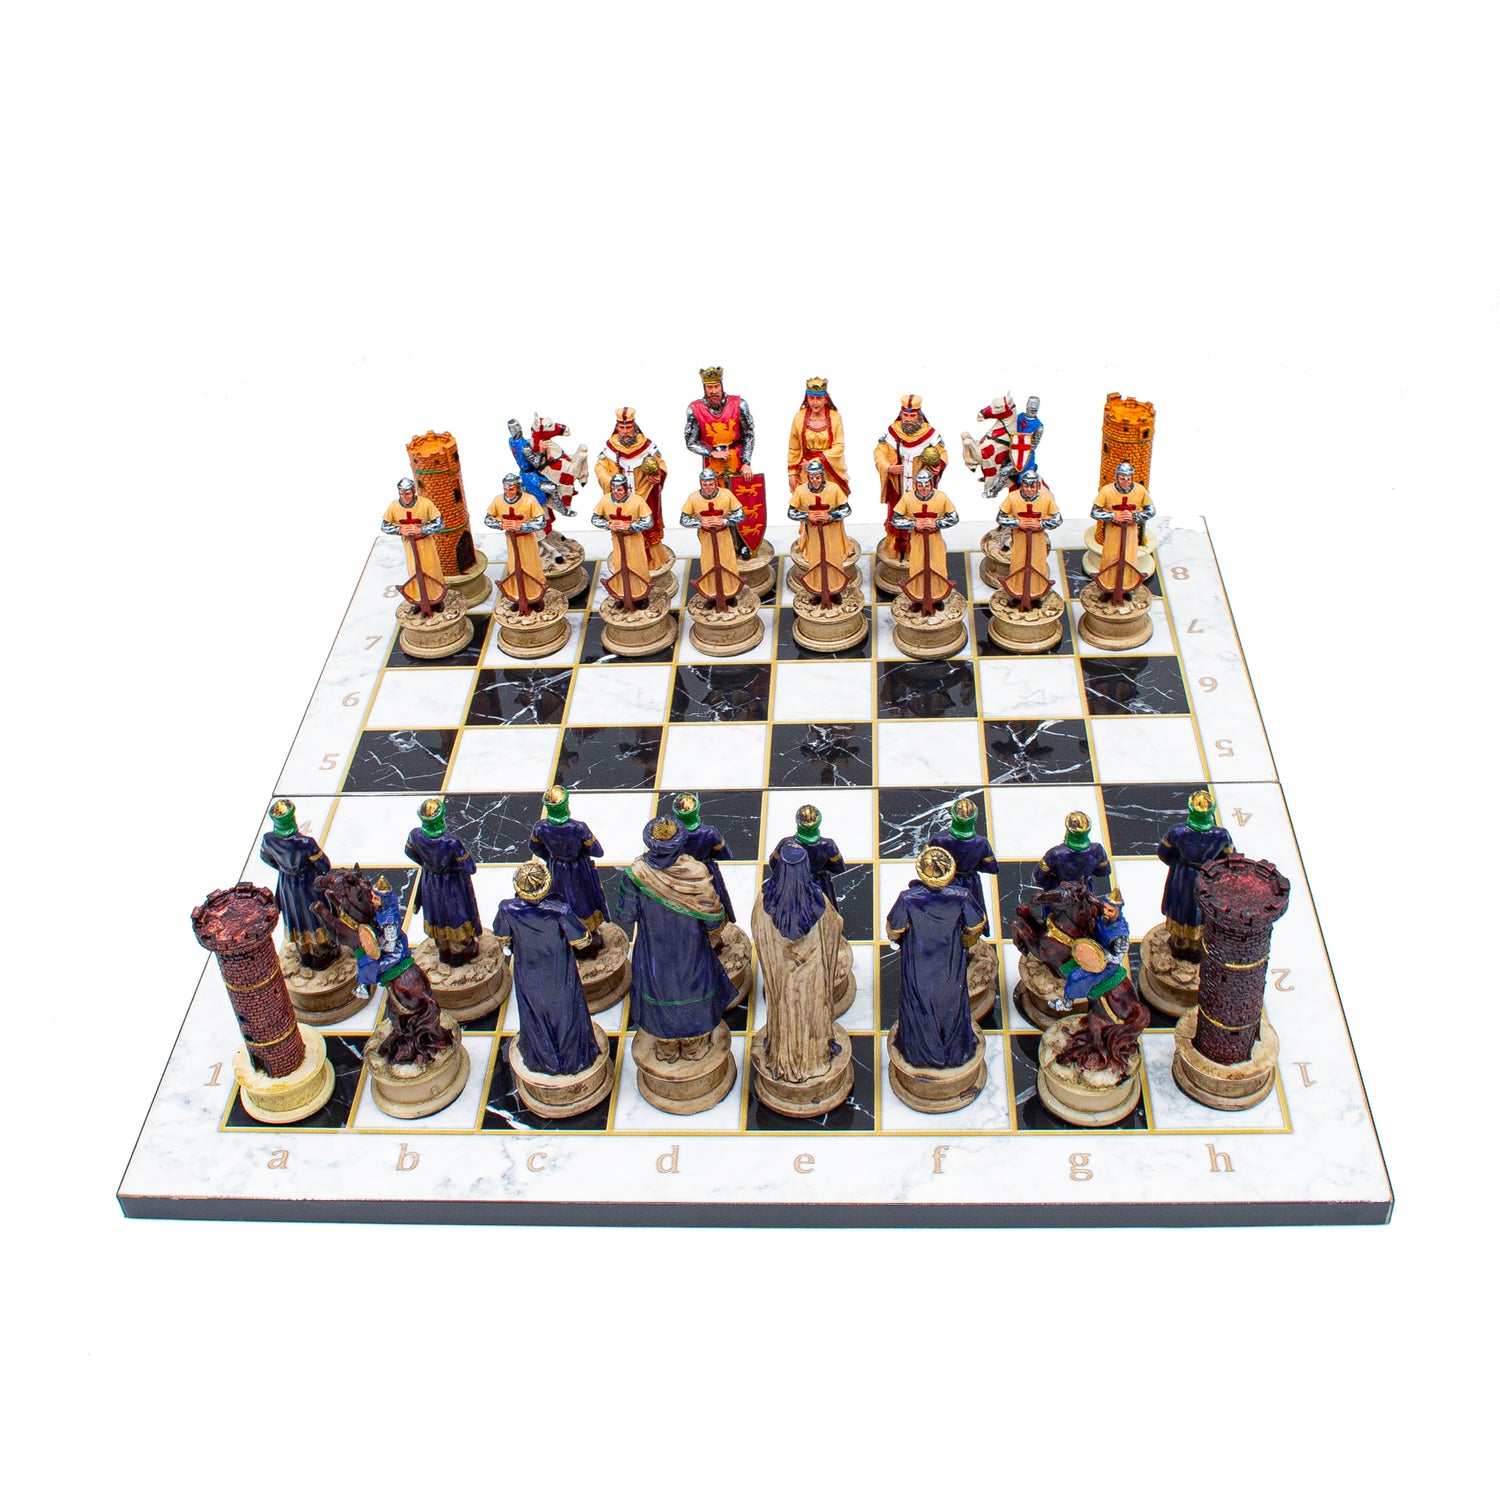 Ottoman & Crusaders Chess: Hand-Painted on Foldable Board - Ketohandcraft